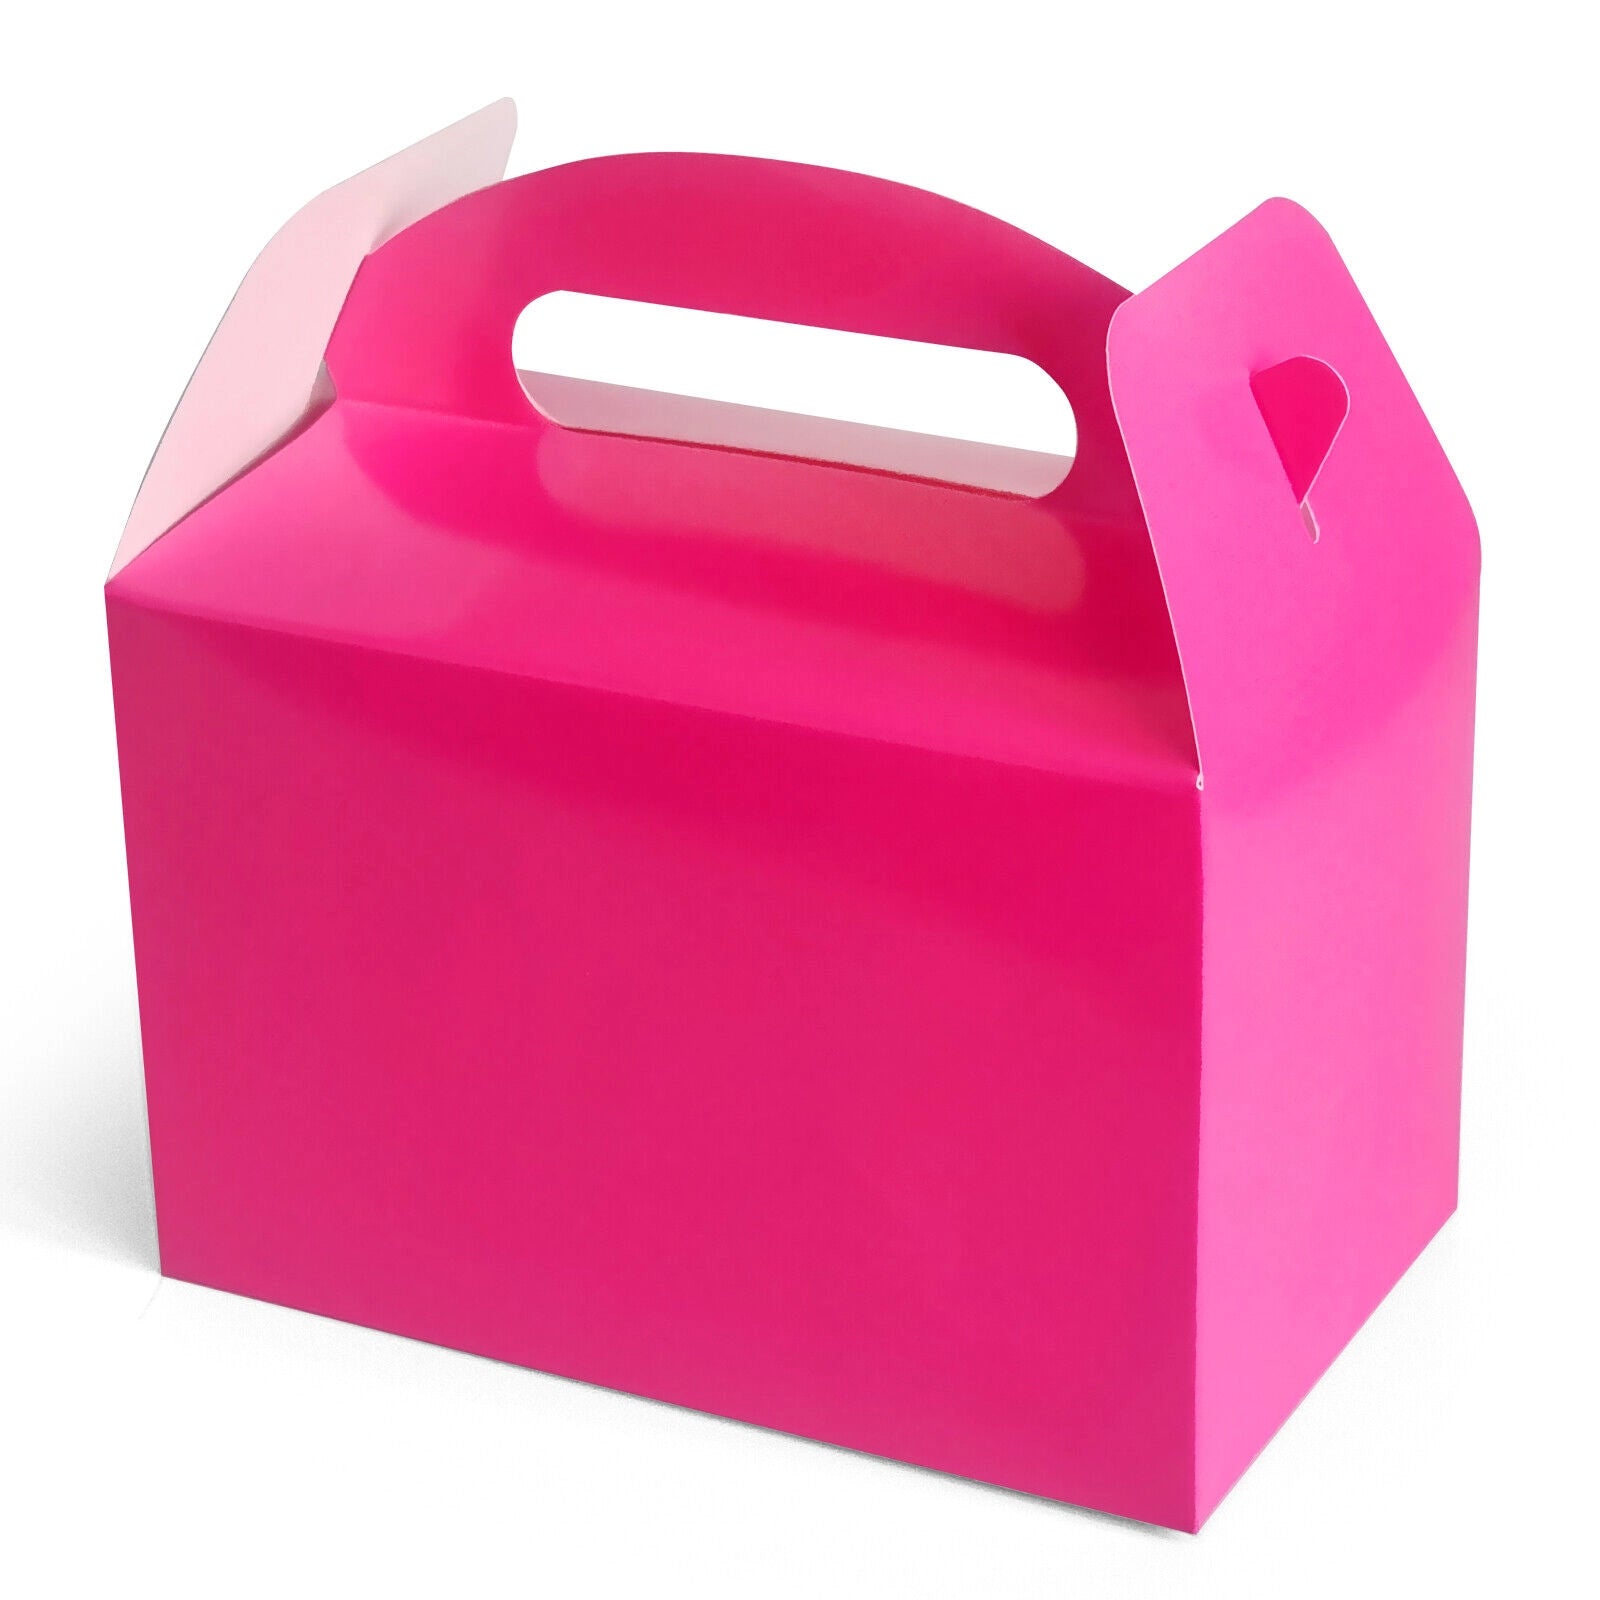 Personalised Party Boxes for Birthday Gift Christmas Loot - Hot Pink Box